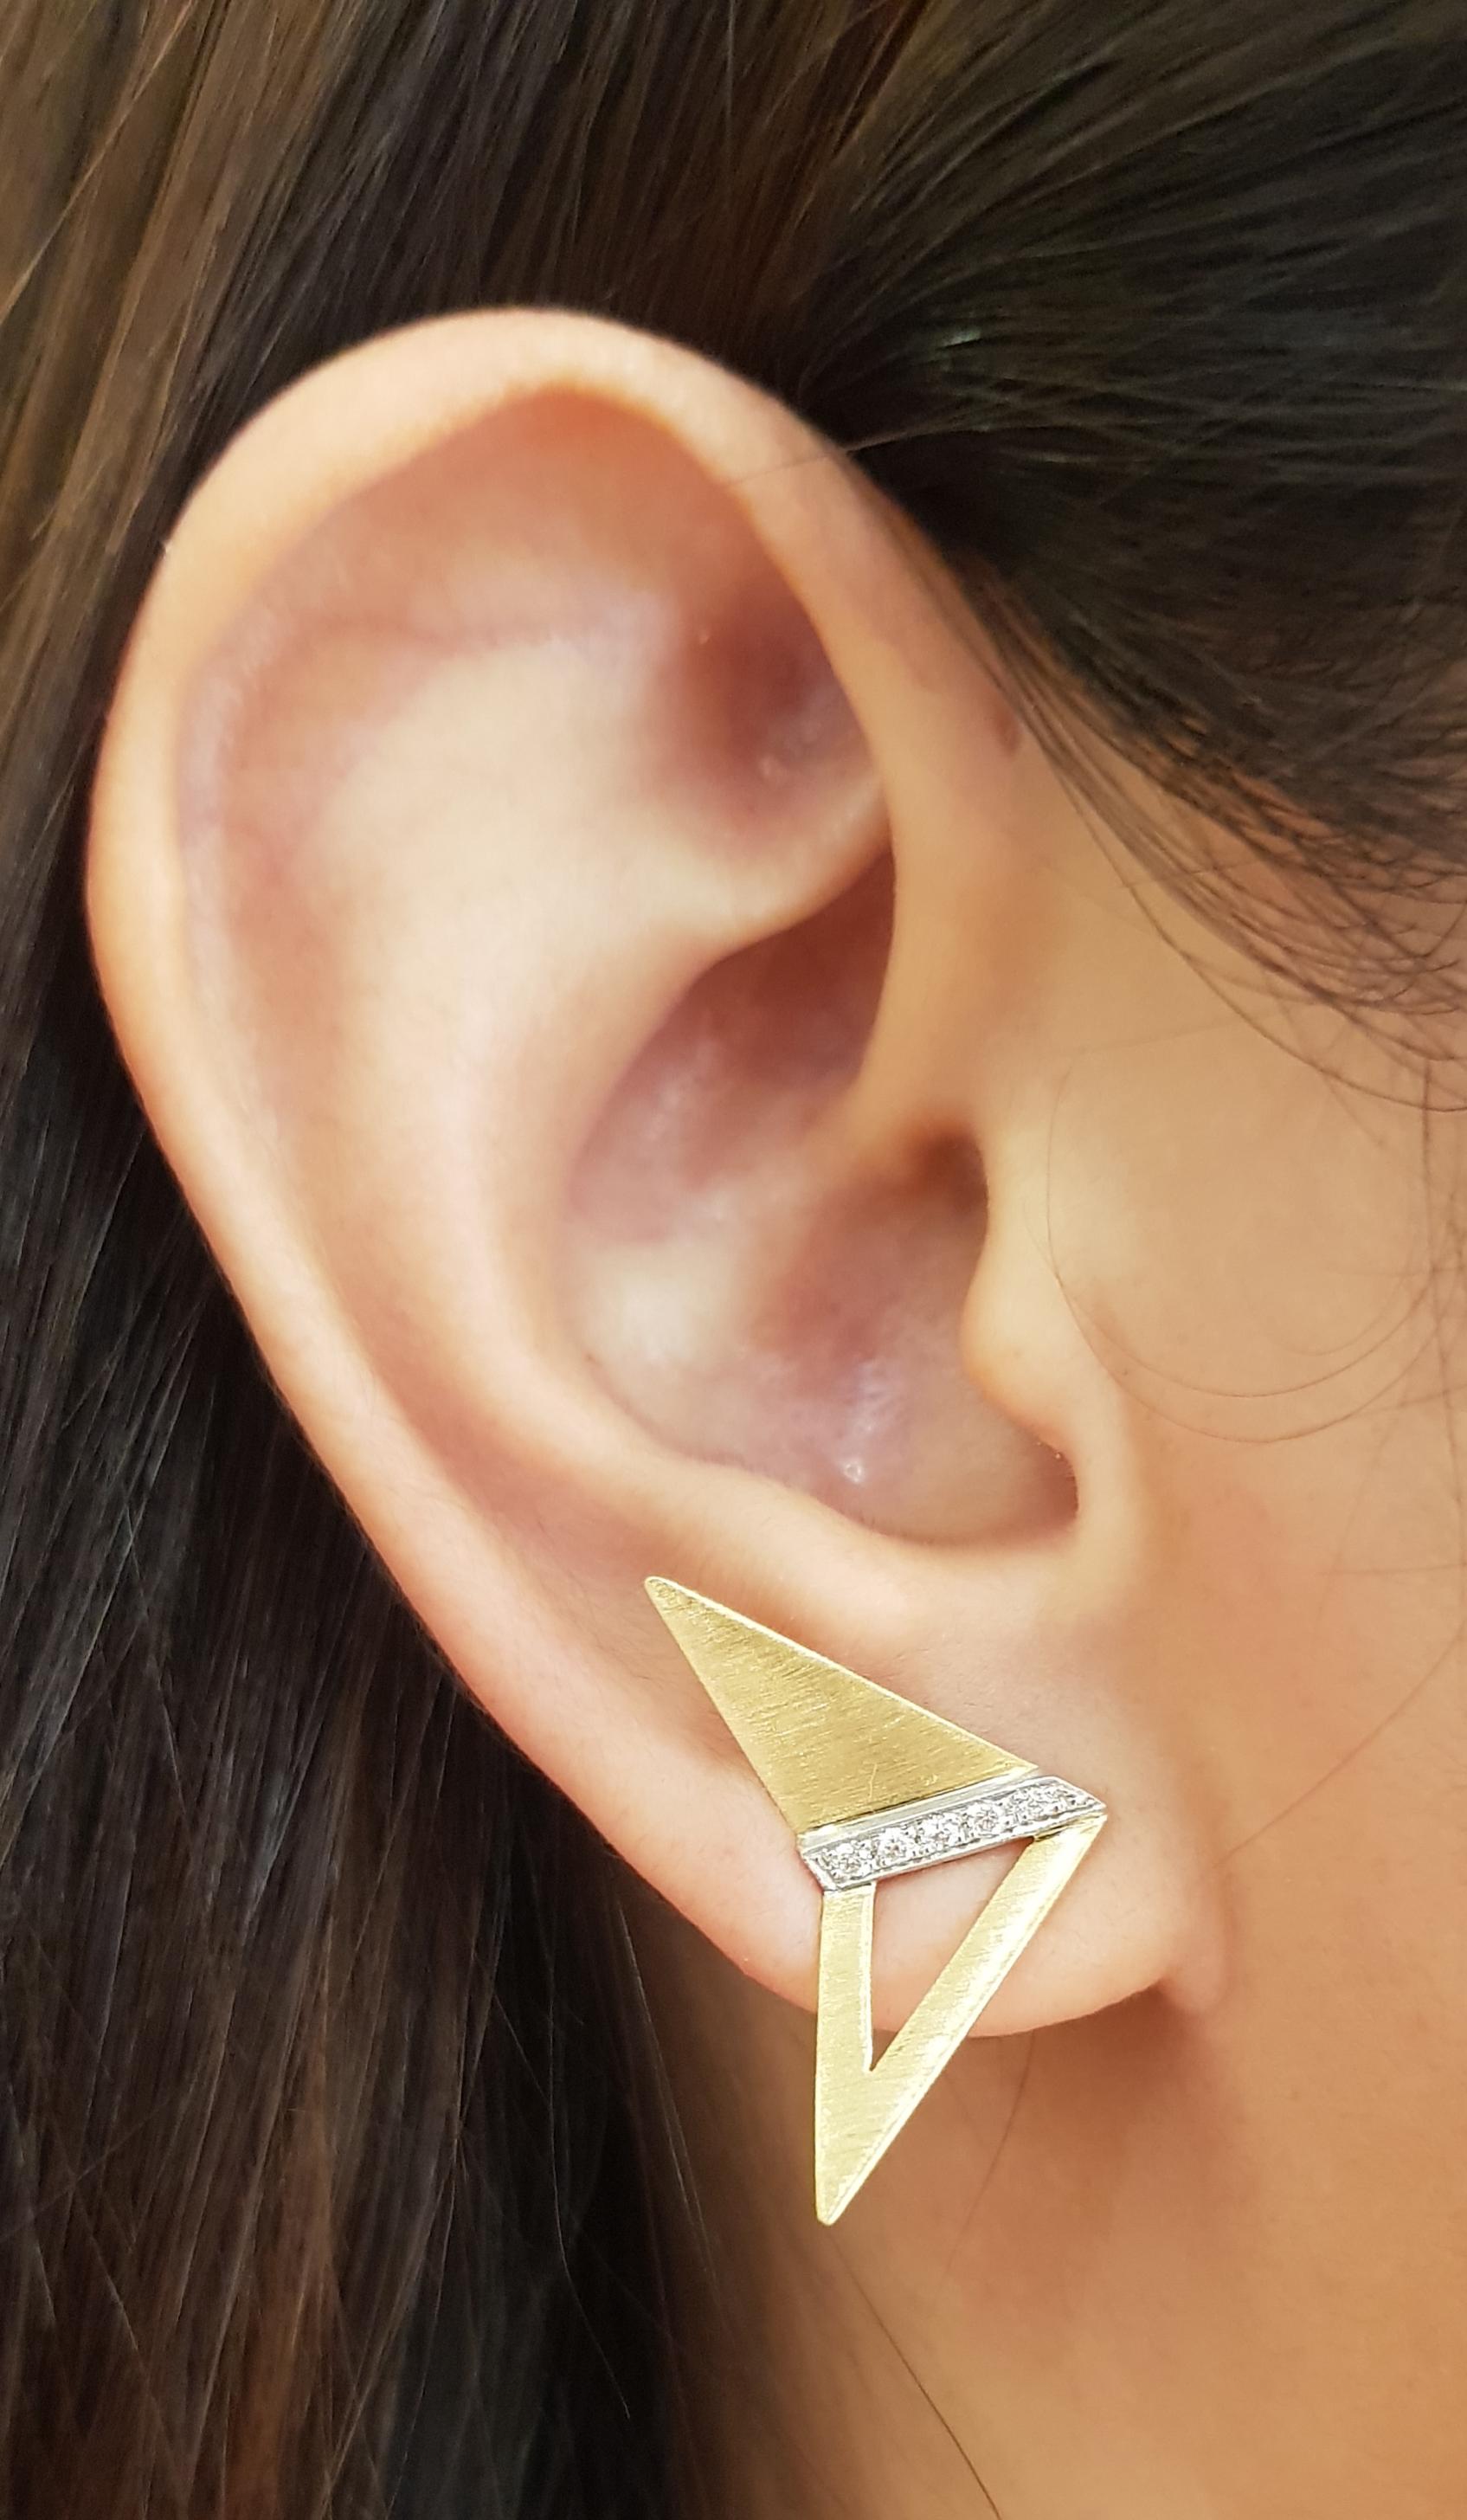 Diamond 0.10 carat Earrings set in 18 Karat Gold Settings 

Width: 1.7 cm 
Length: 2.3 cm
Total Weight: 4.37 grams

The ancient Japanese tradition of paper folding has inspired the form and elements of this modern collection. With a series of folds